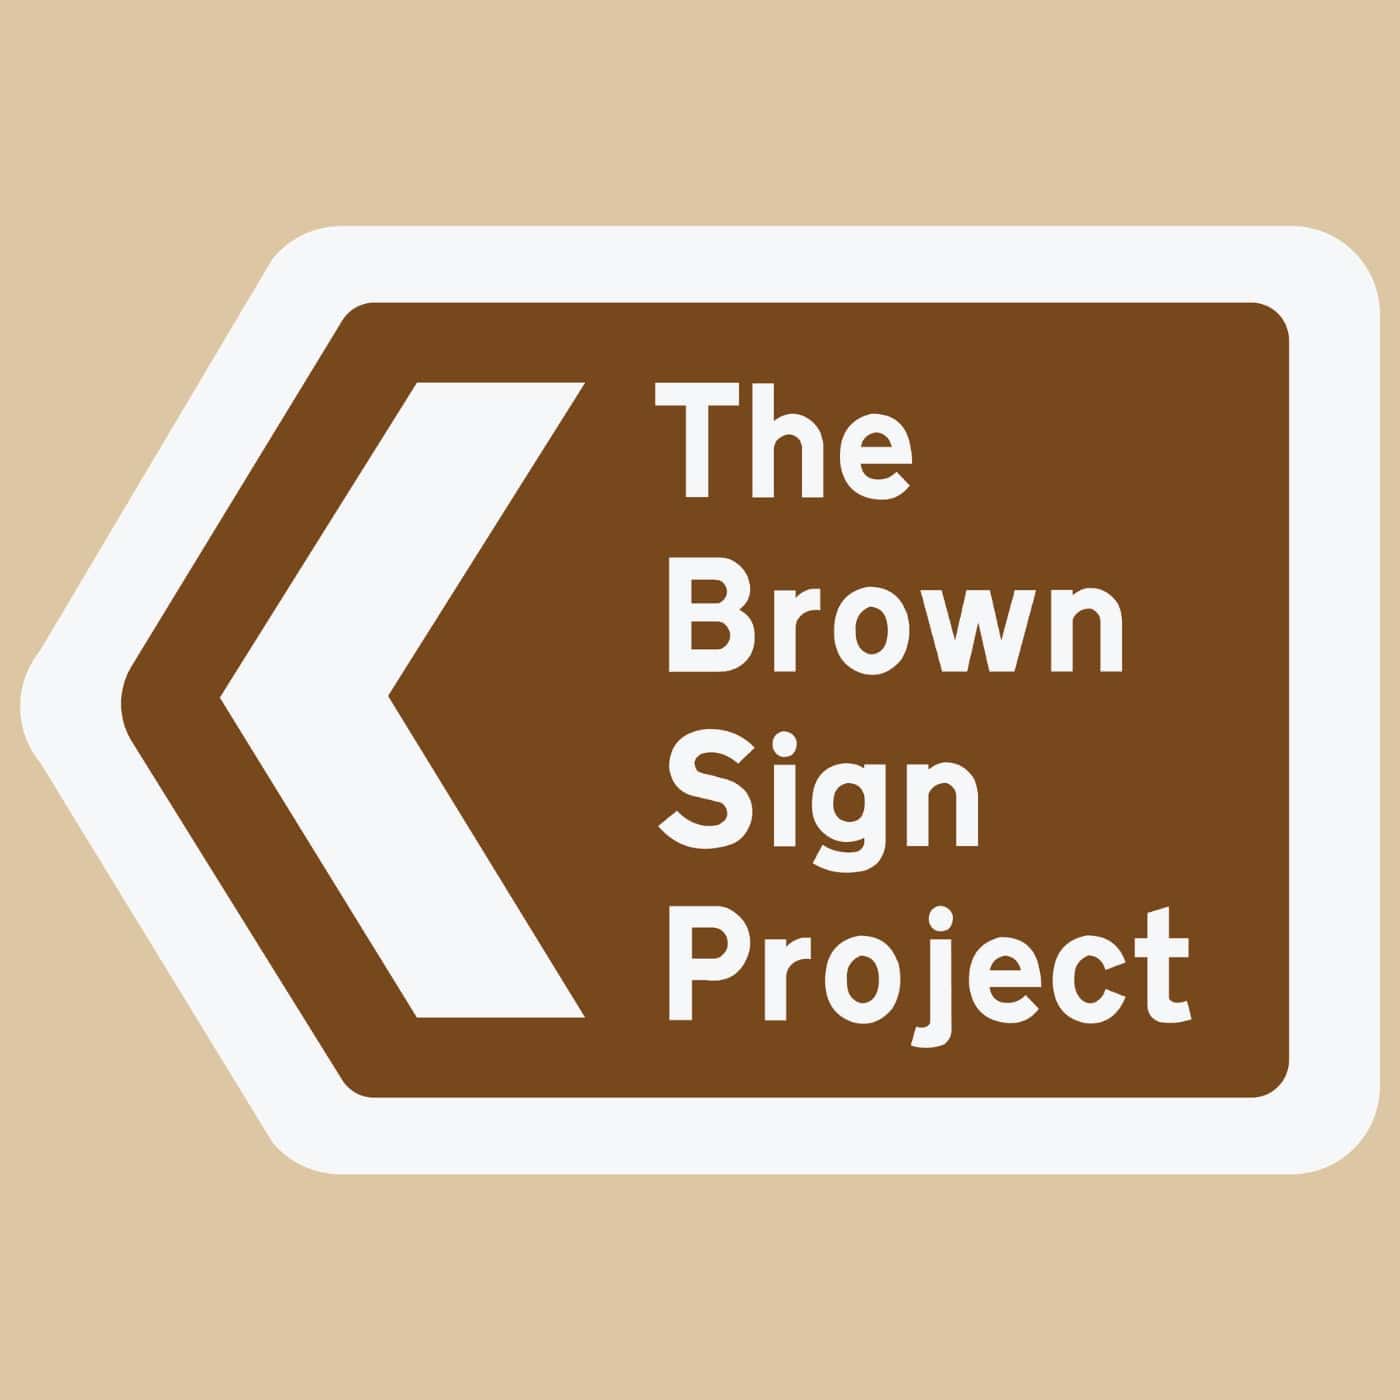 The Brown Sign Project